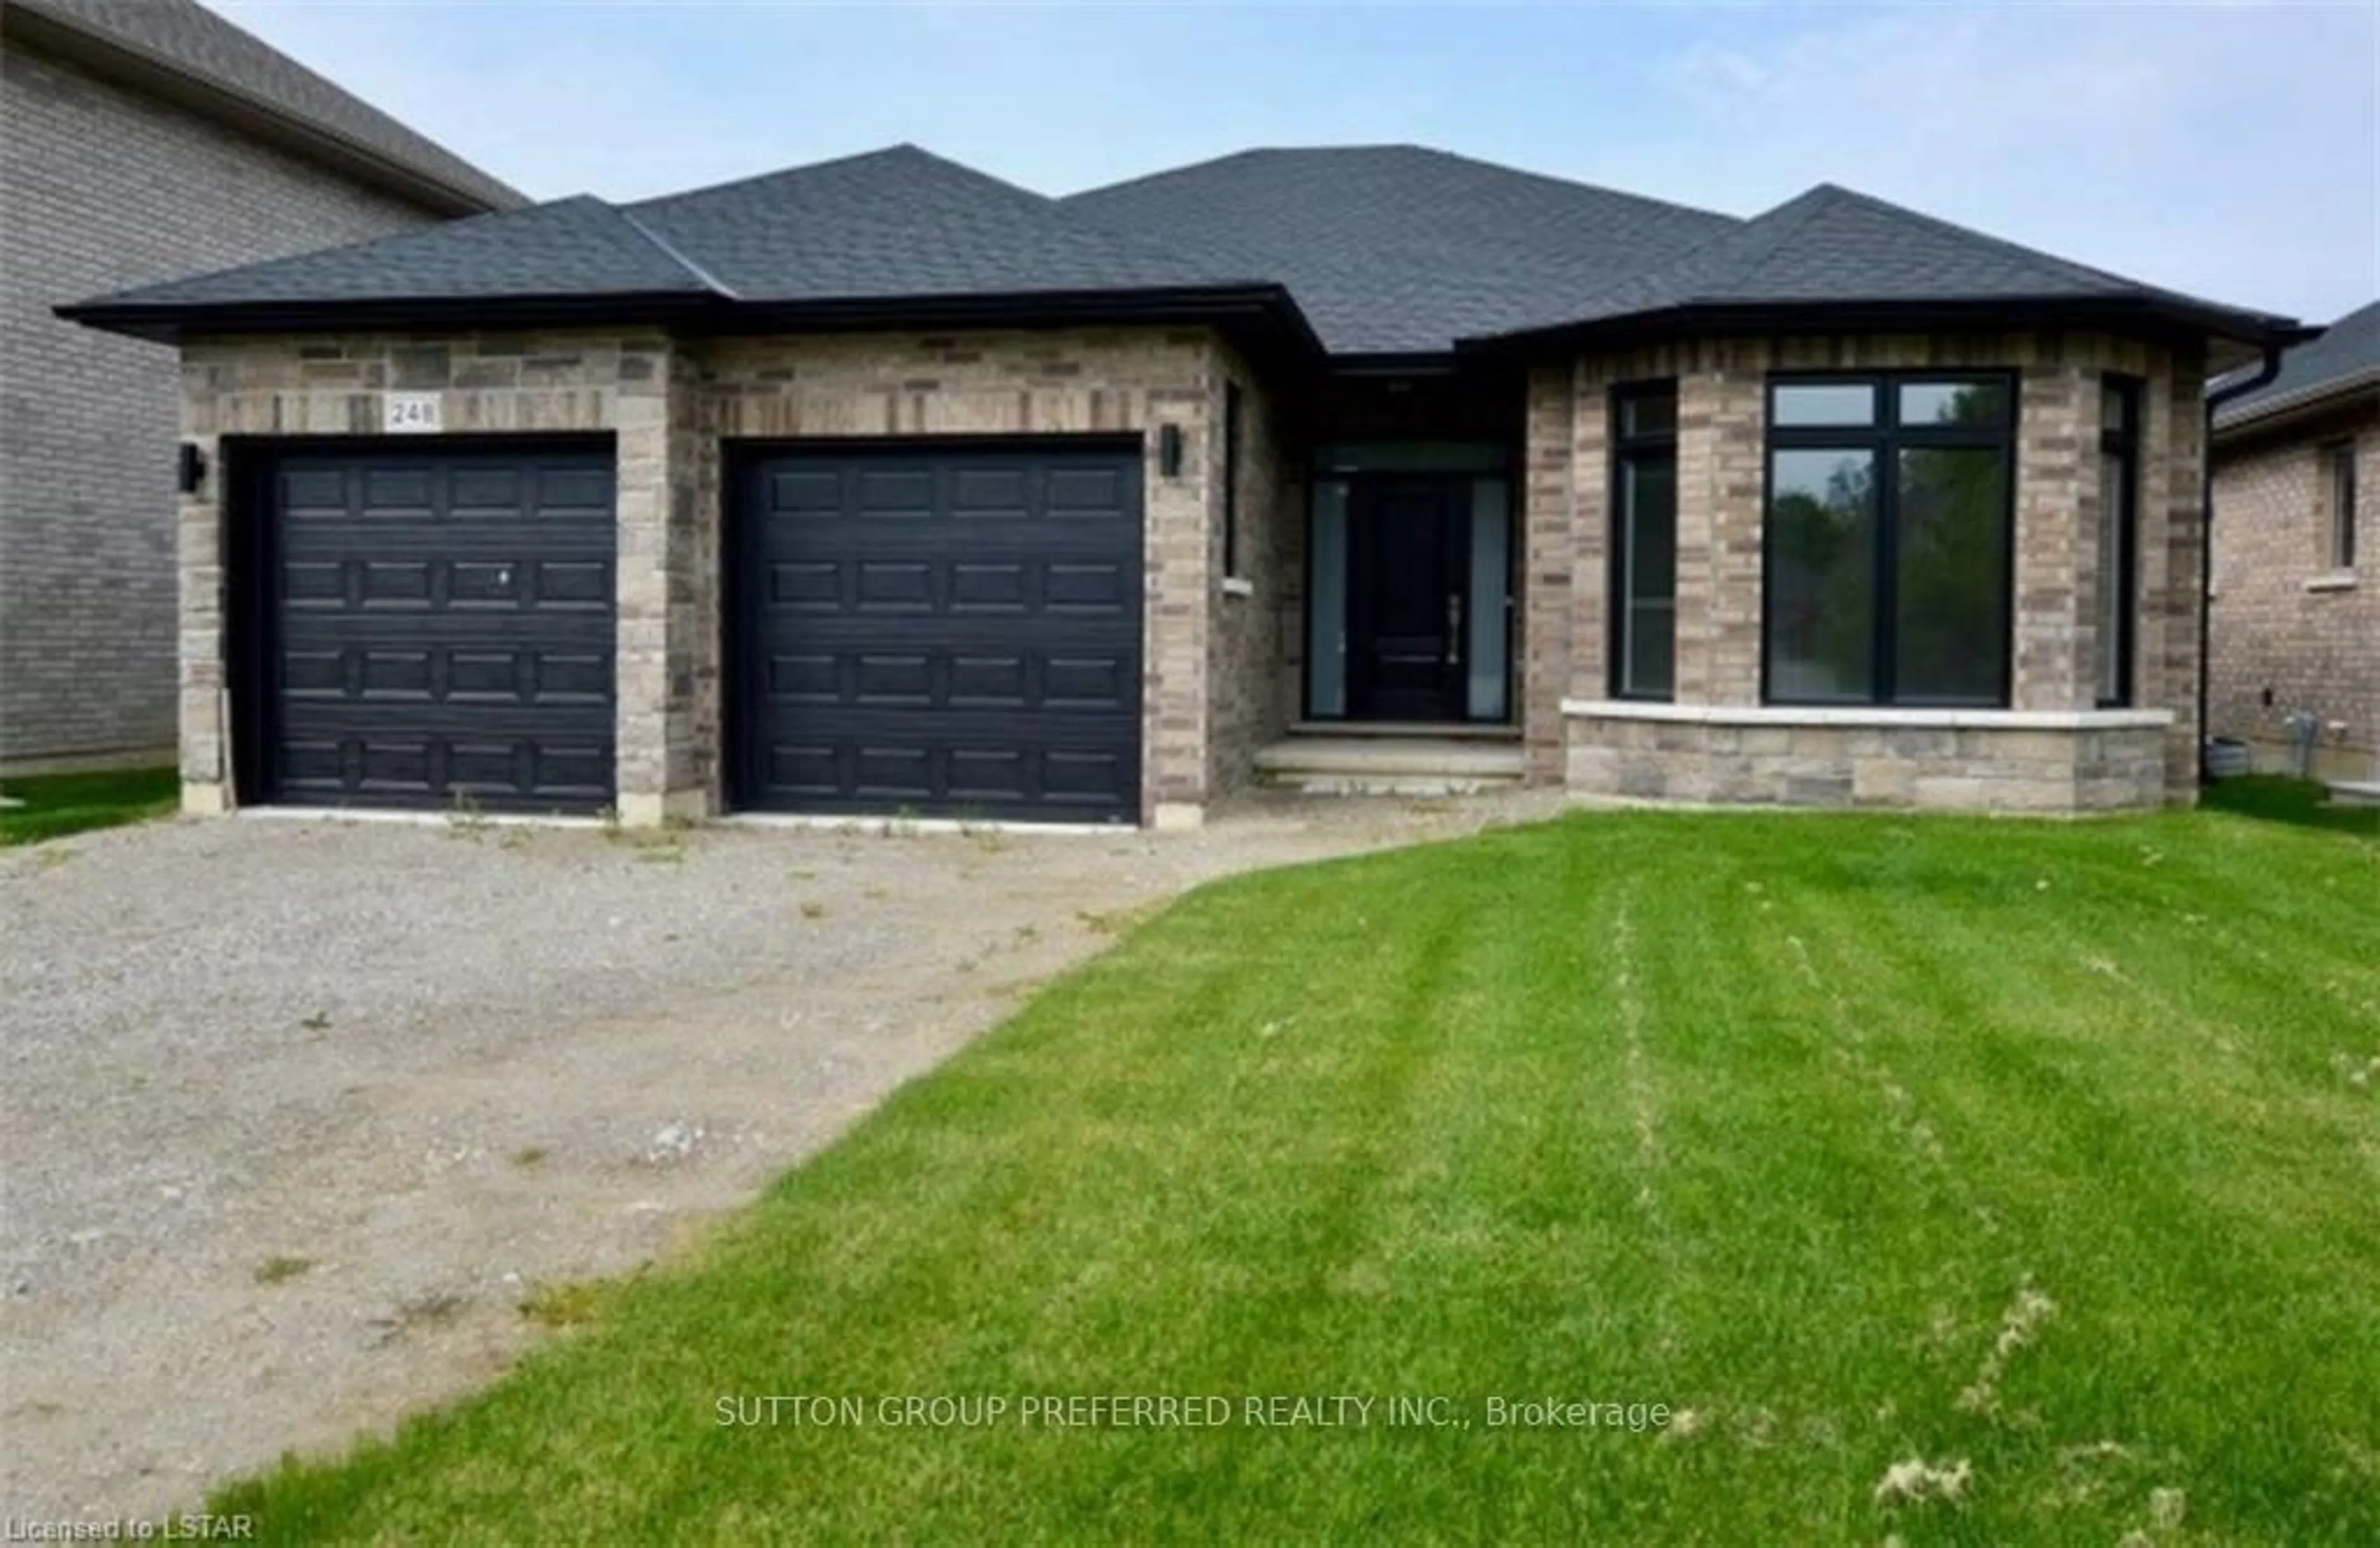 Home with brick exterior material for 248 Leitch St, Dutton/Dunwich Ontario N0L 1J0